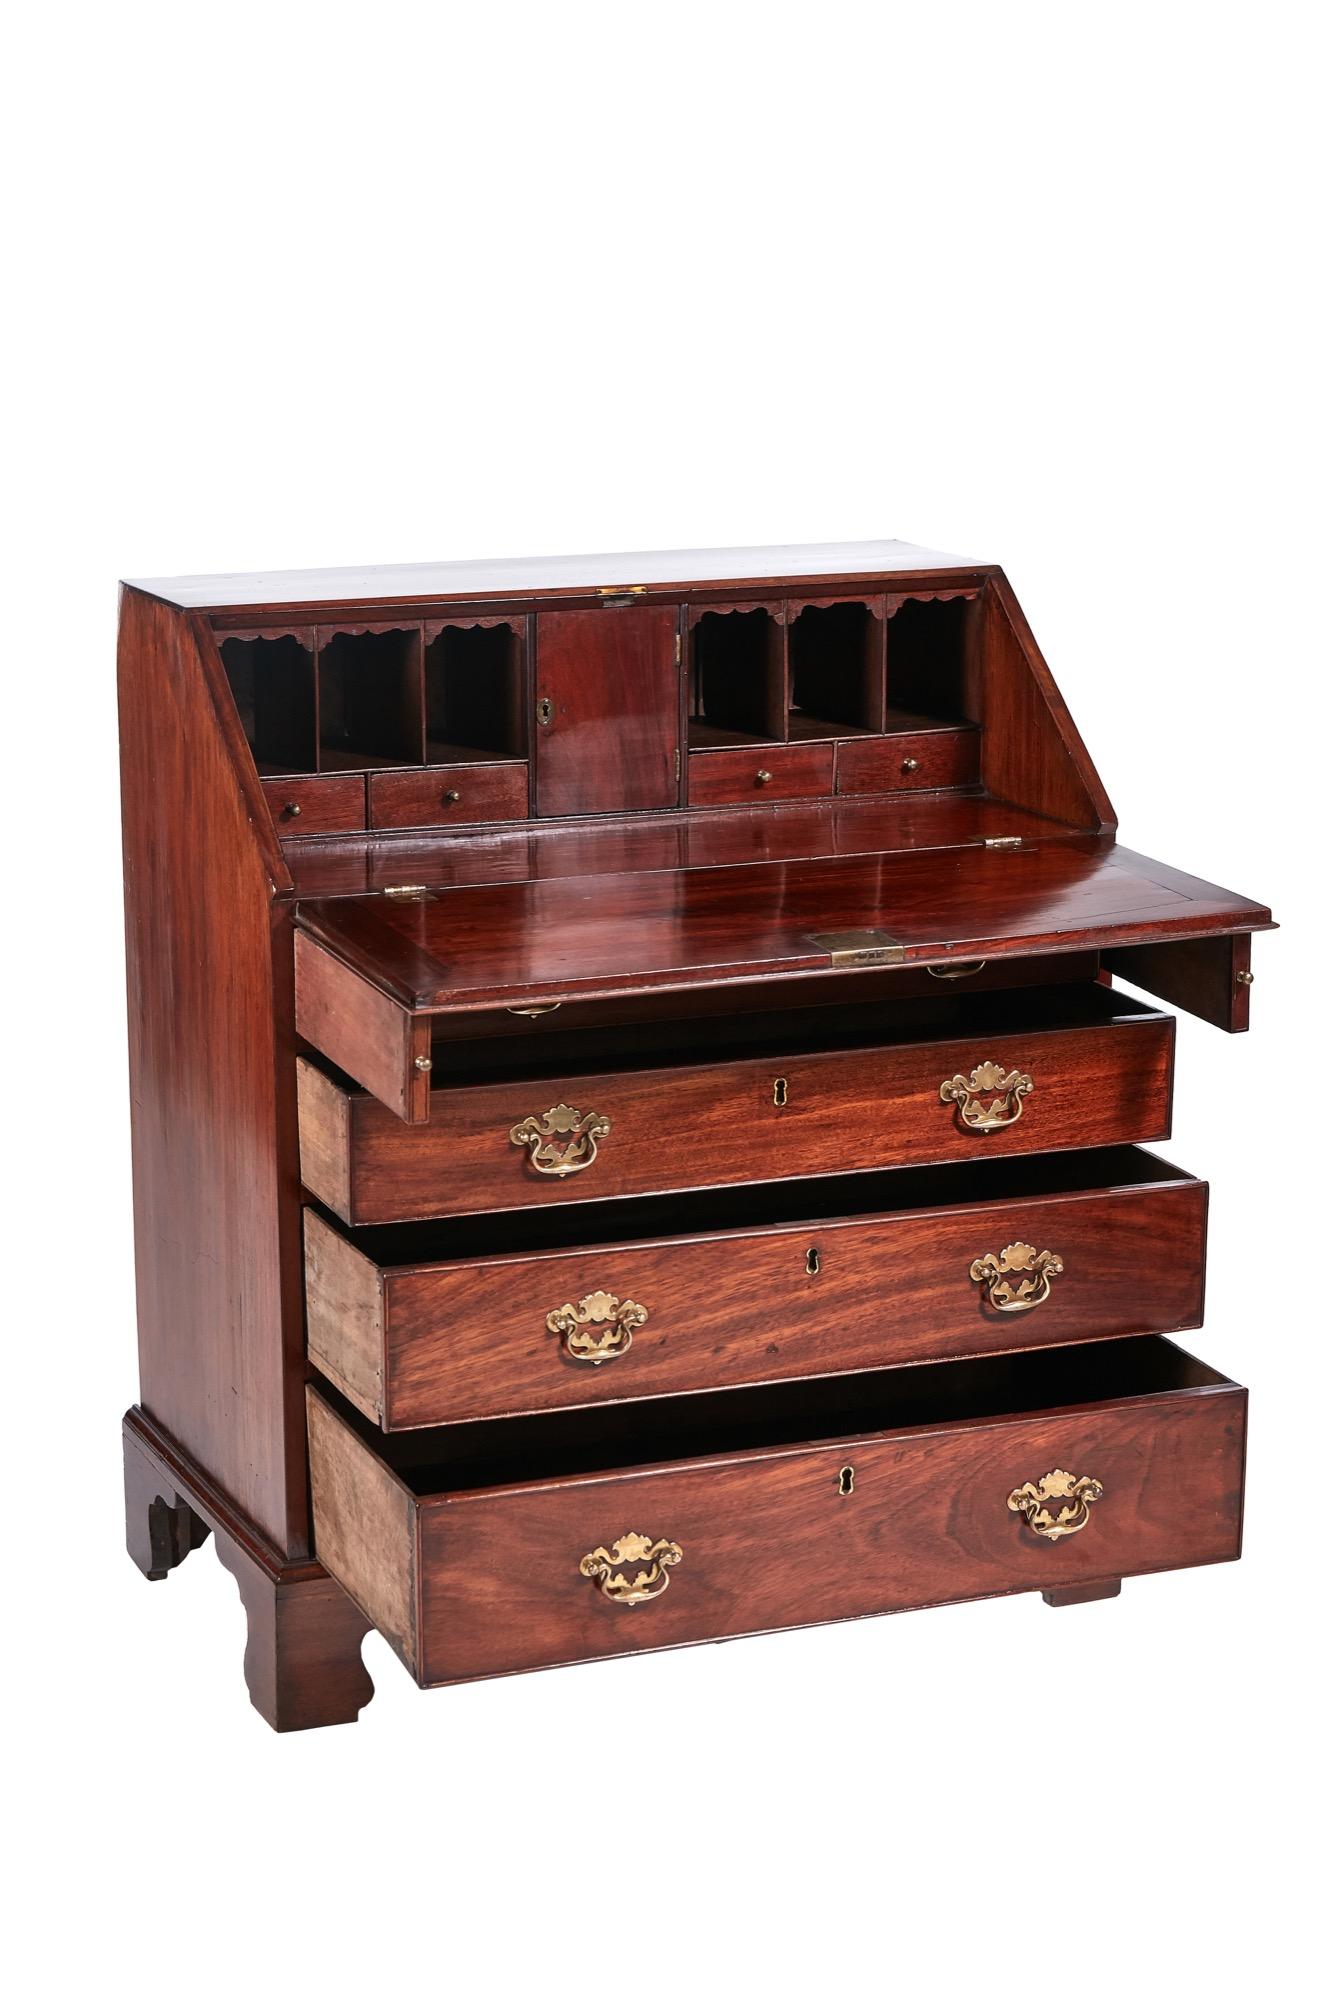 Antique George III mahogany bureau having a sloping fall which opens to reveal a fitted interior of short drawers, pigeon holes and a center door. It boasts four long graduated drawers below and it stands on original bracket feet.

Striking color